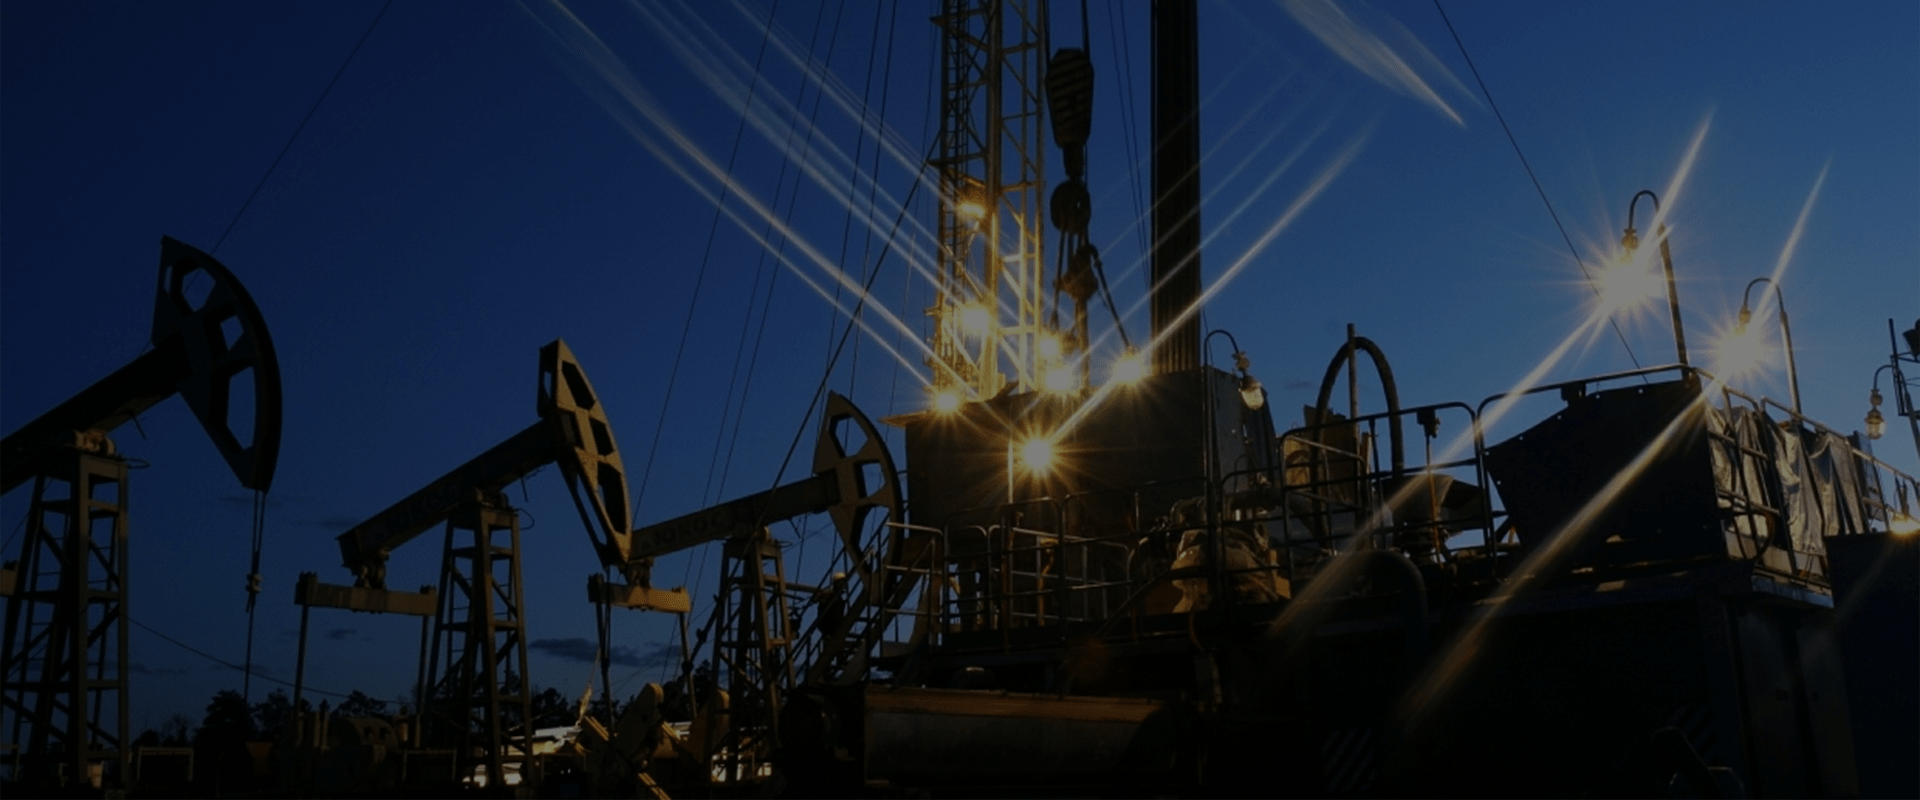 Complex services for drilling and oil production